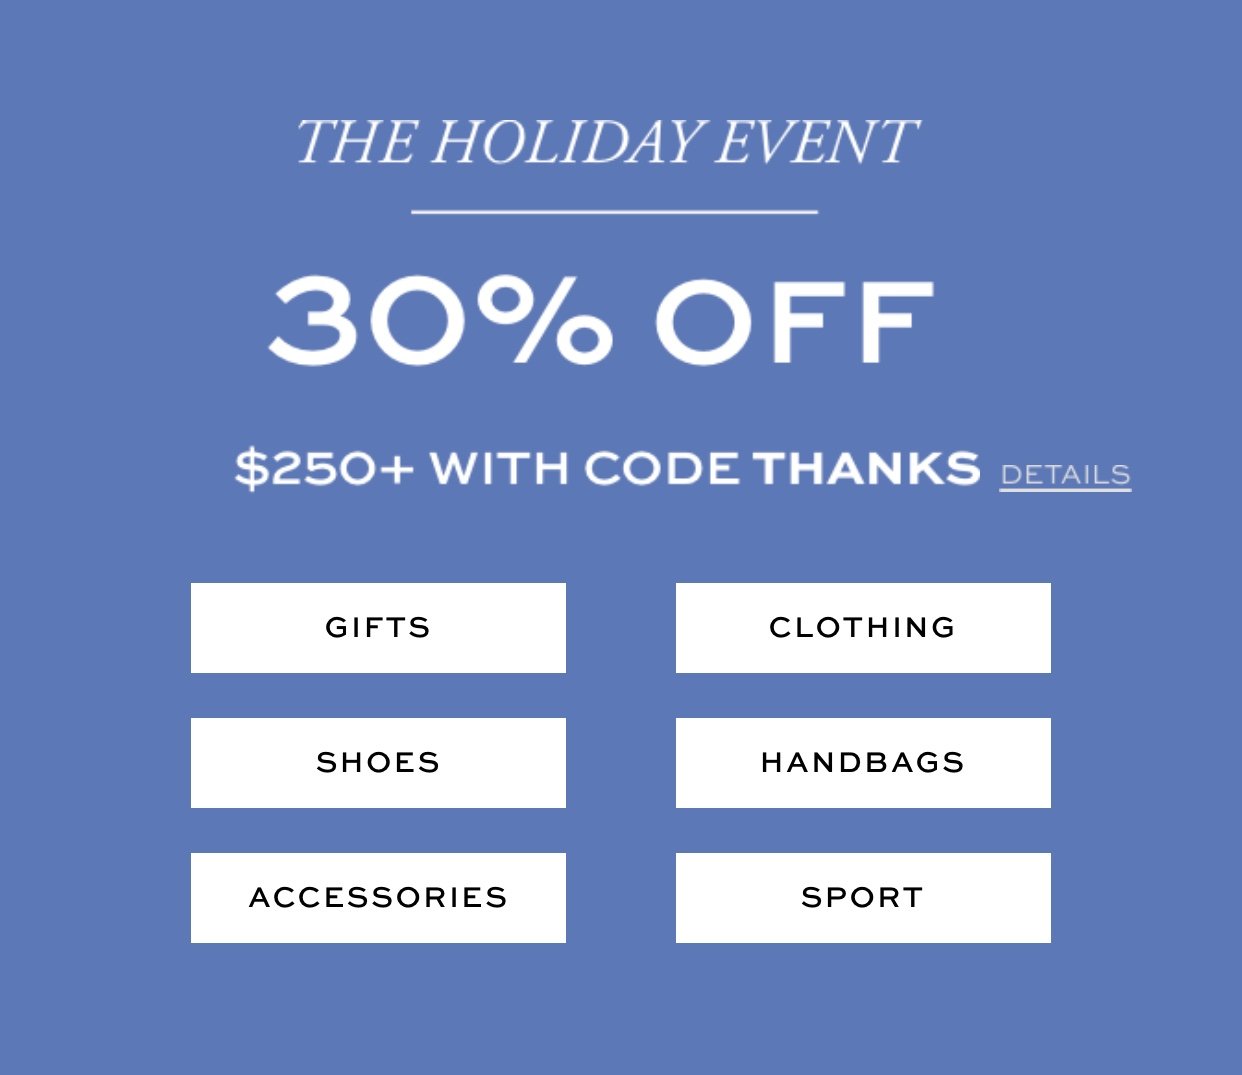 Tory Burch Holiday Event 2018 | Save 30% Off Now! - The Double Take Girls